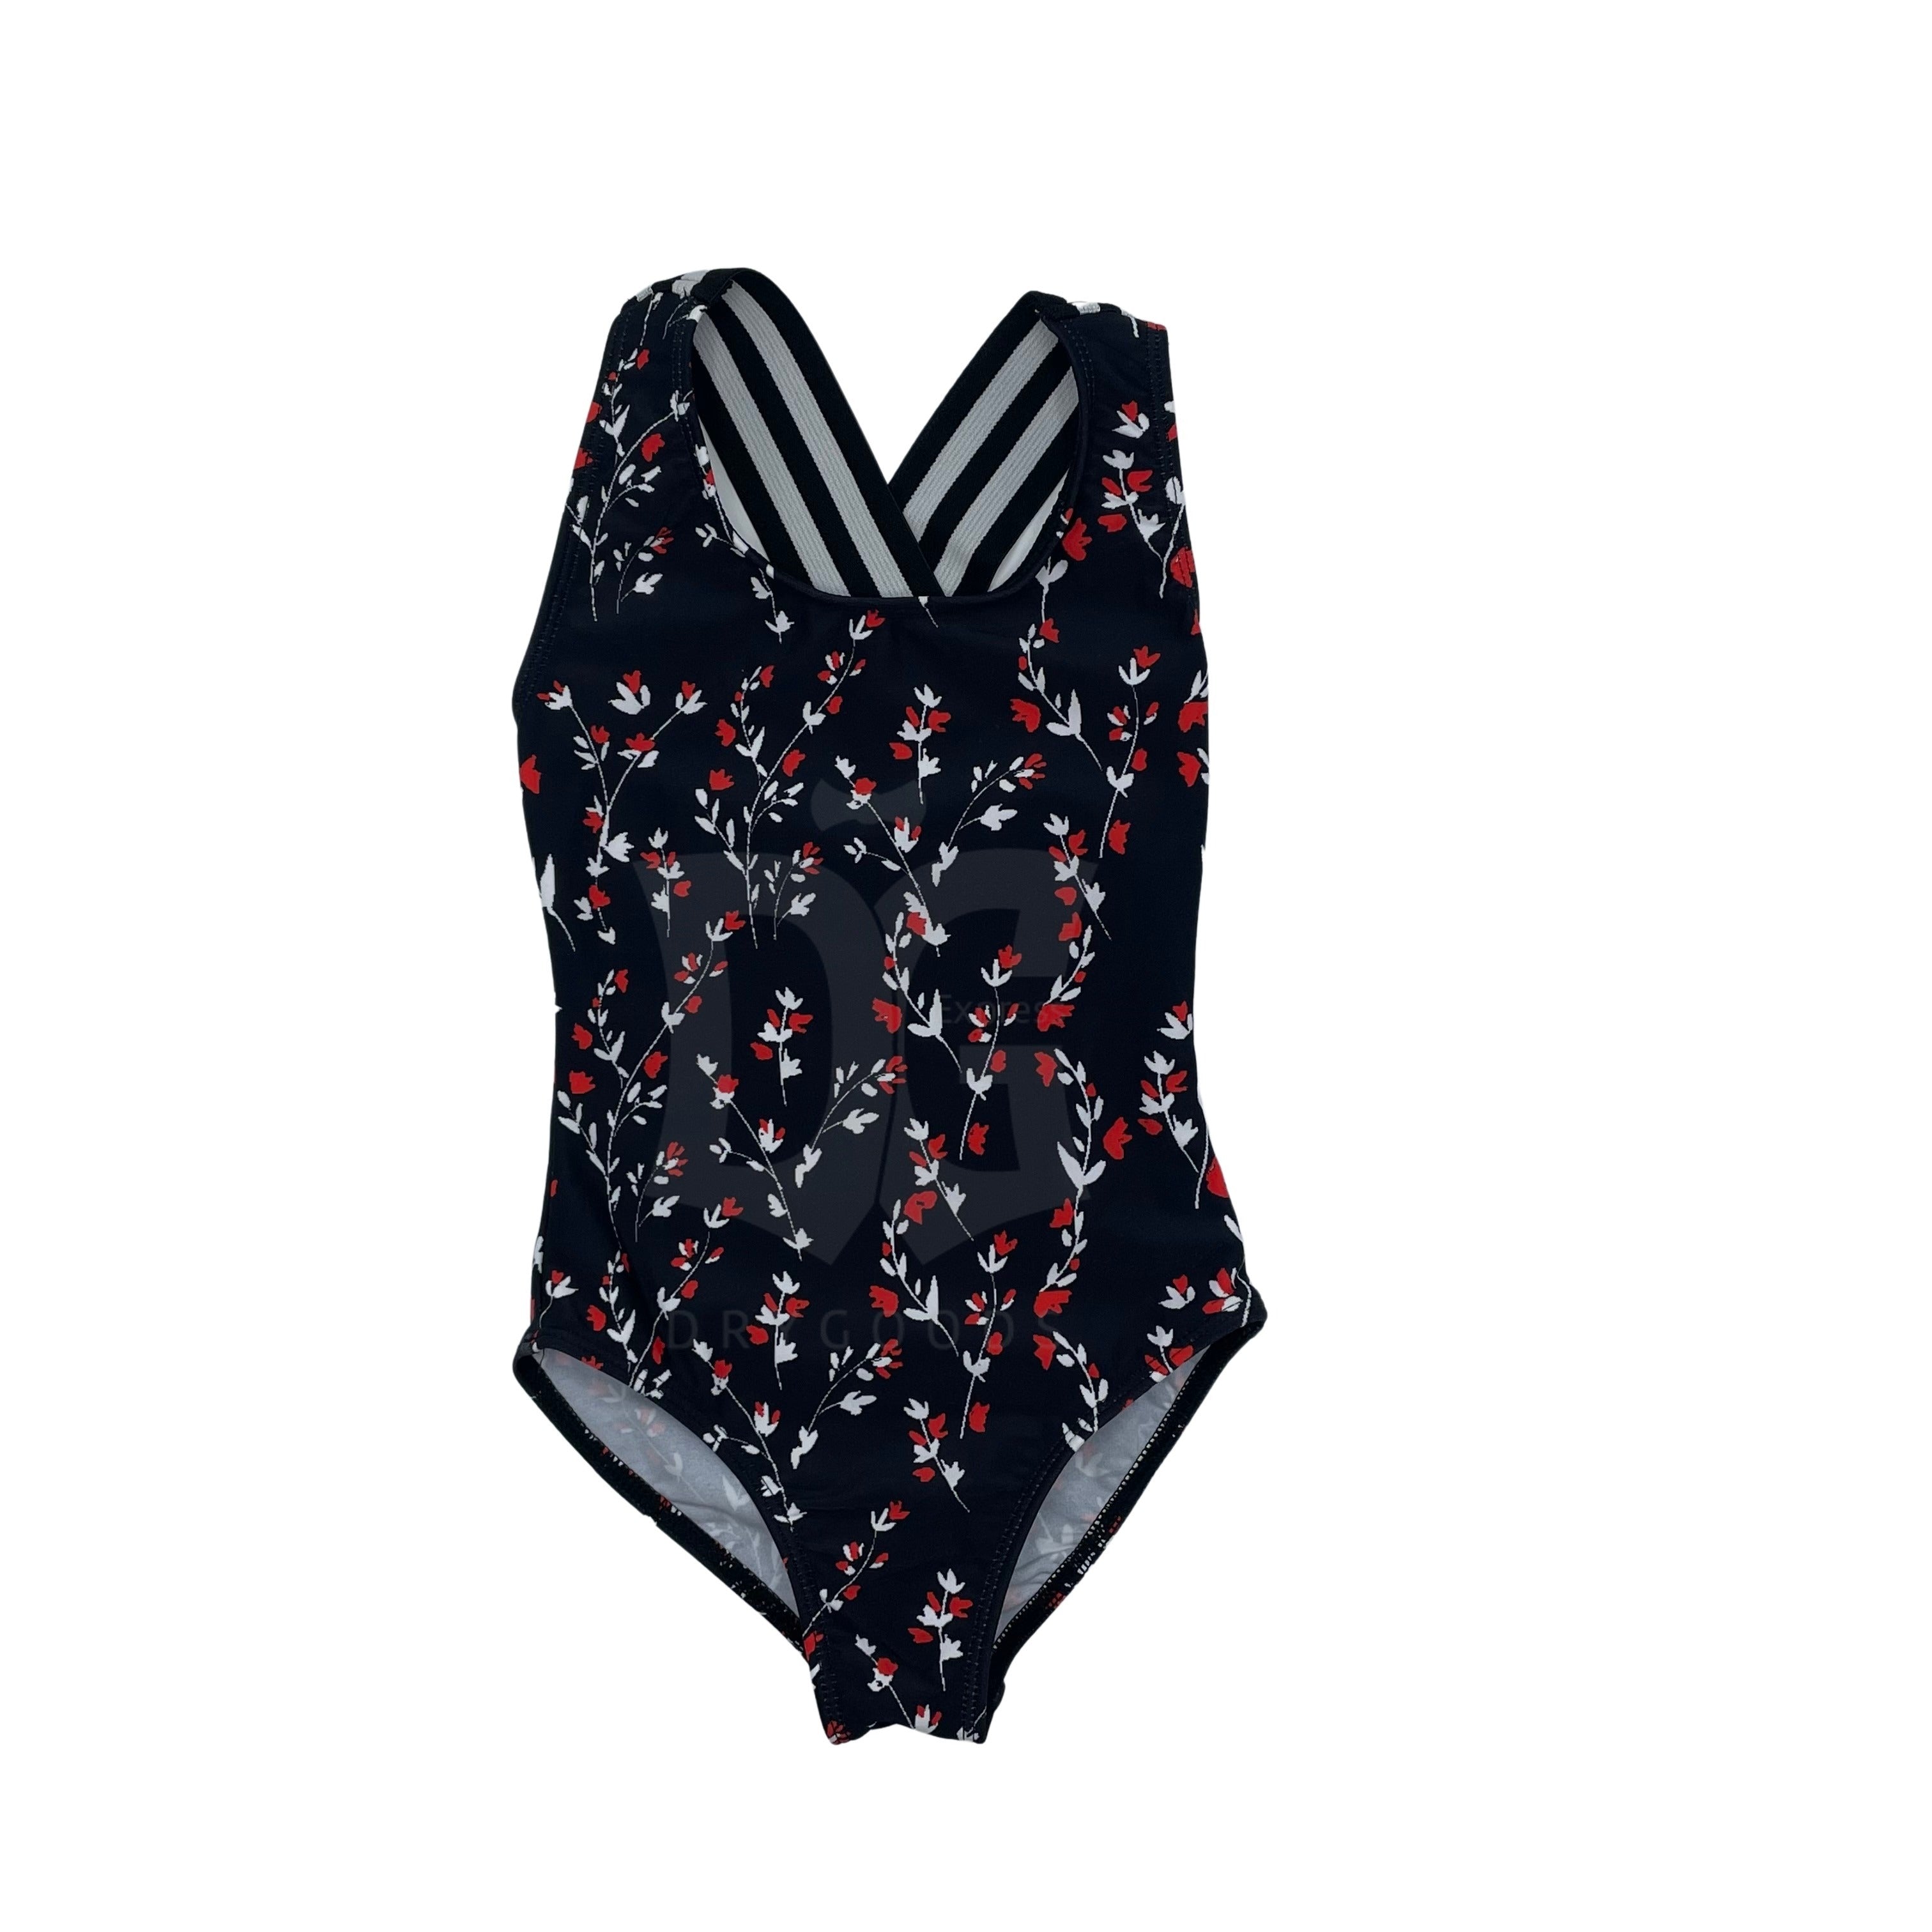 Child Play Girl's Floral Bathing Suit